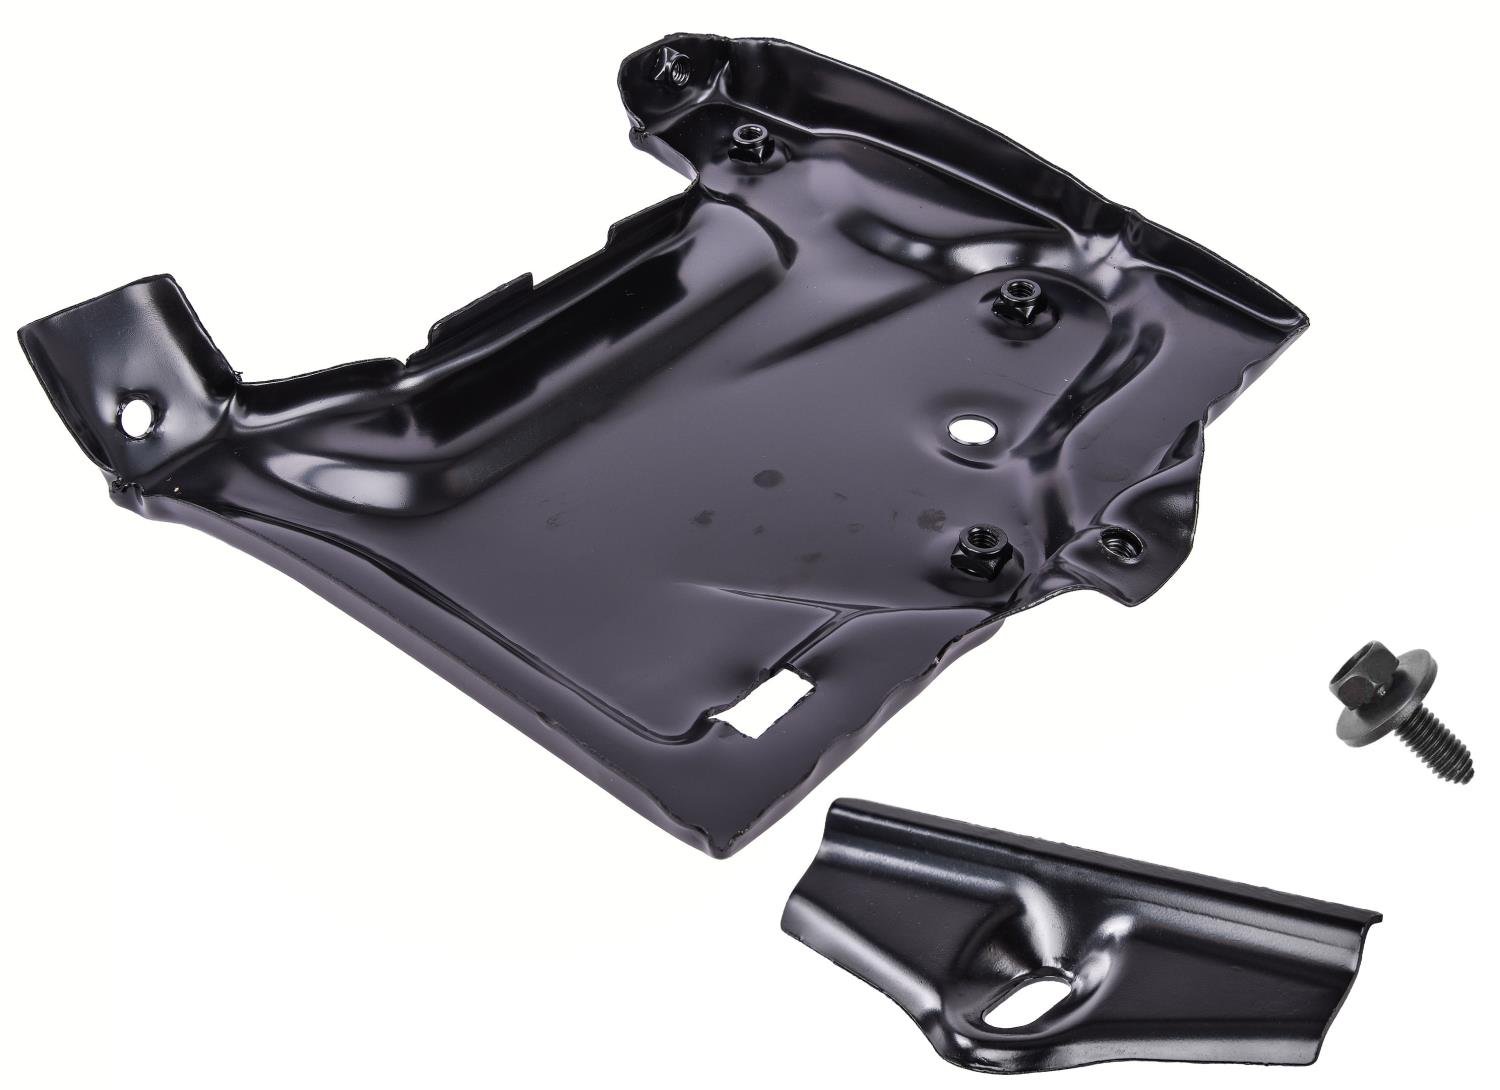 Battery Tray Kit for 1968-1972 Chevy Chevelle, El Camino and 1970-1972 Chevy Monte Carlo